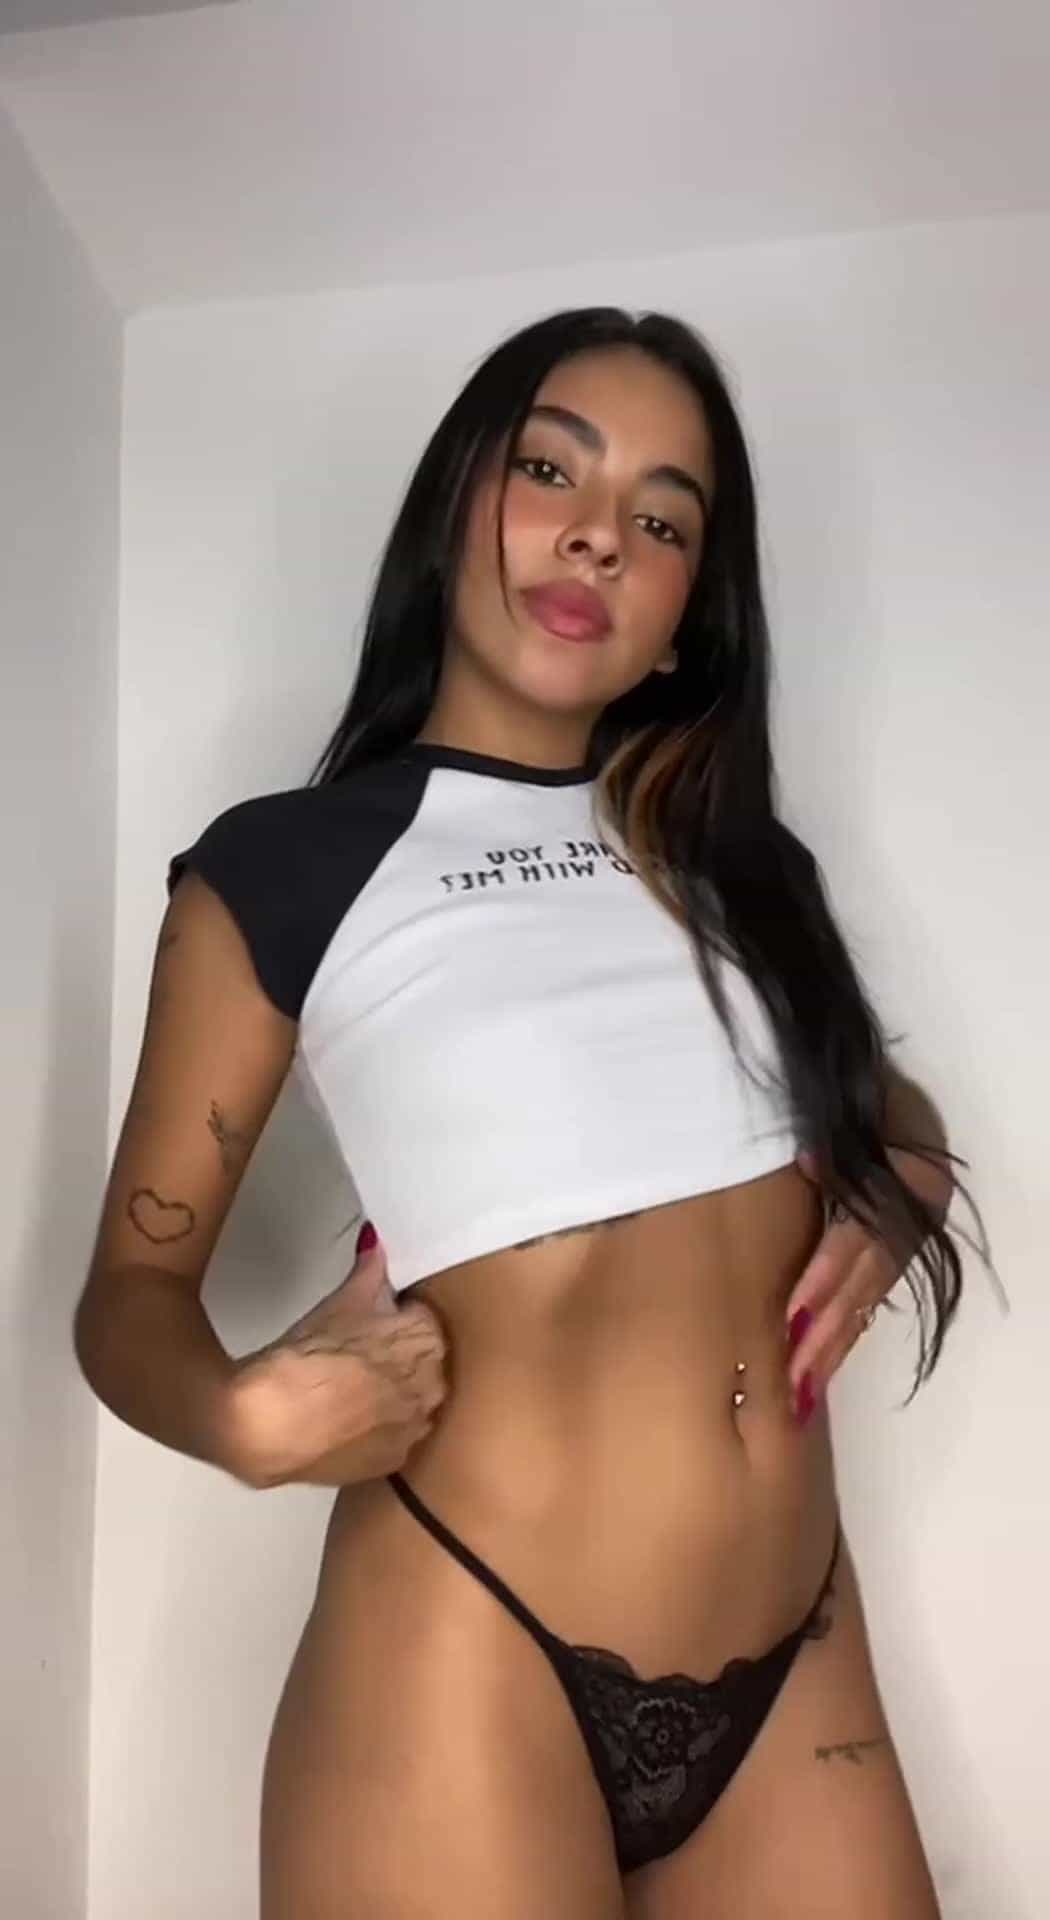 Small titty Latinas, yes we do exist 